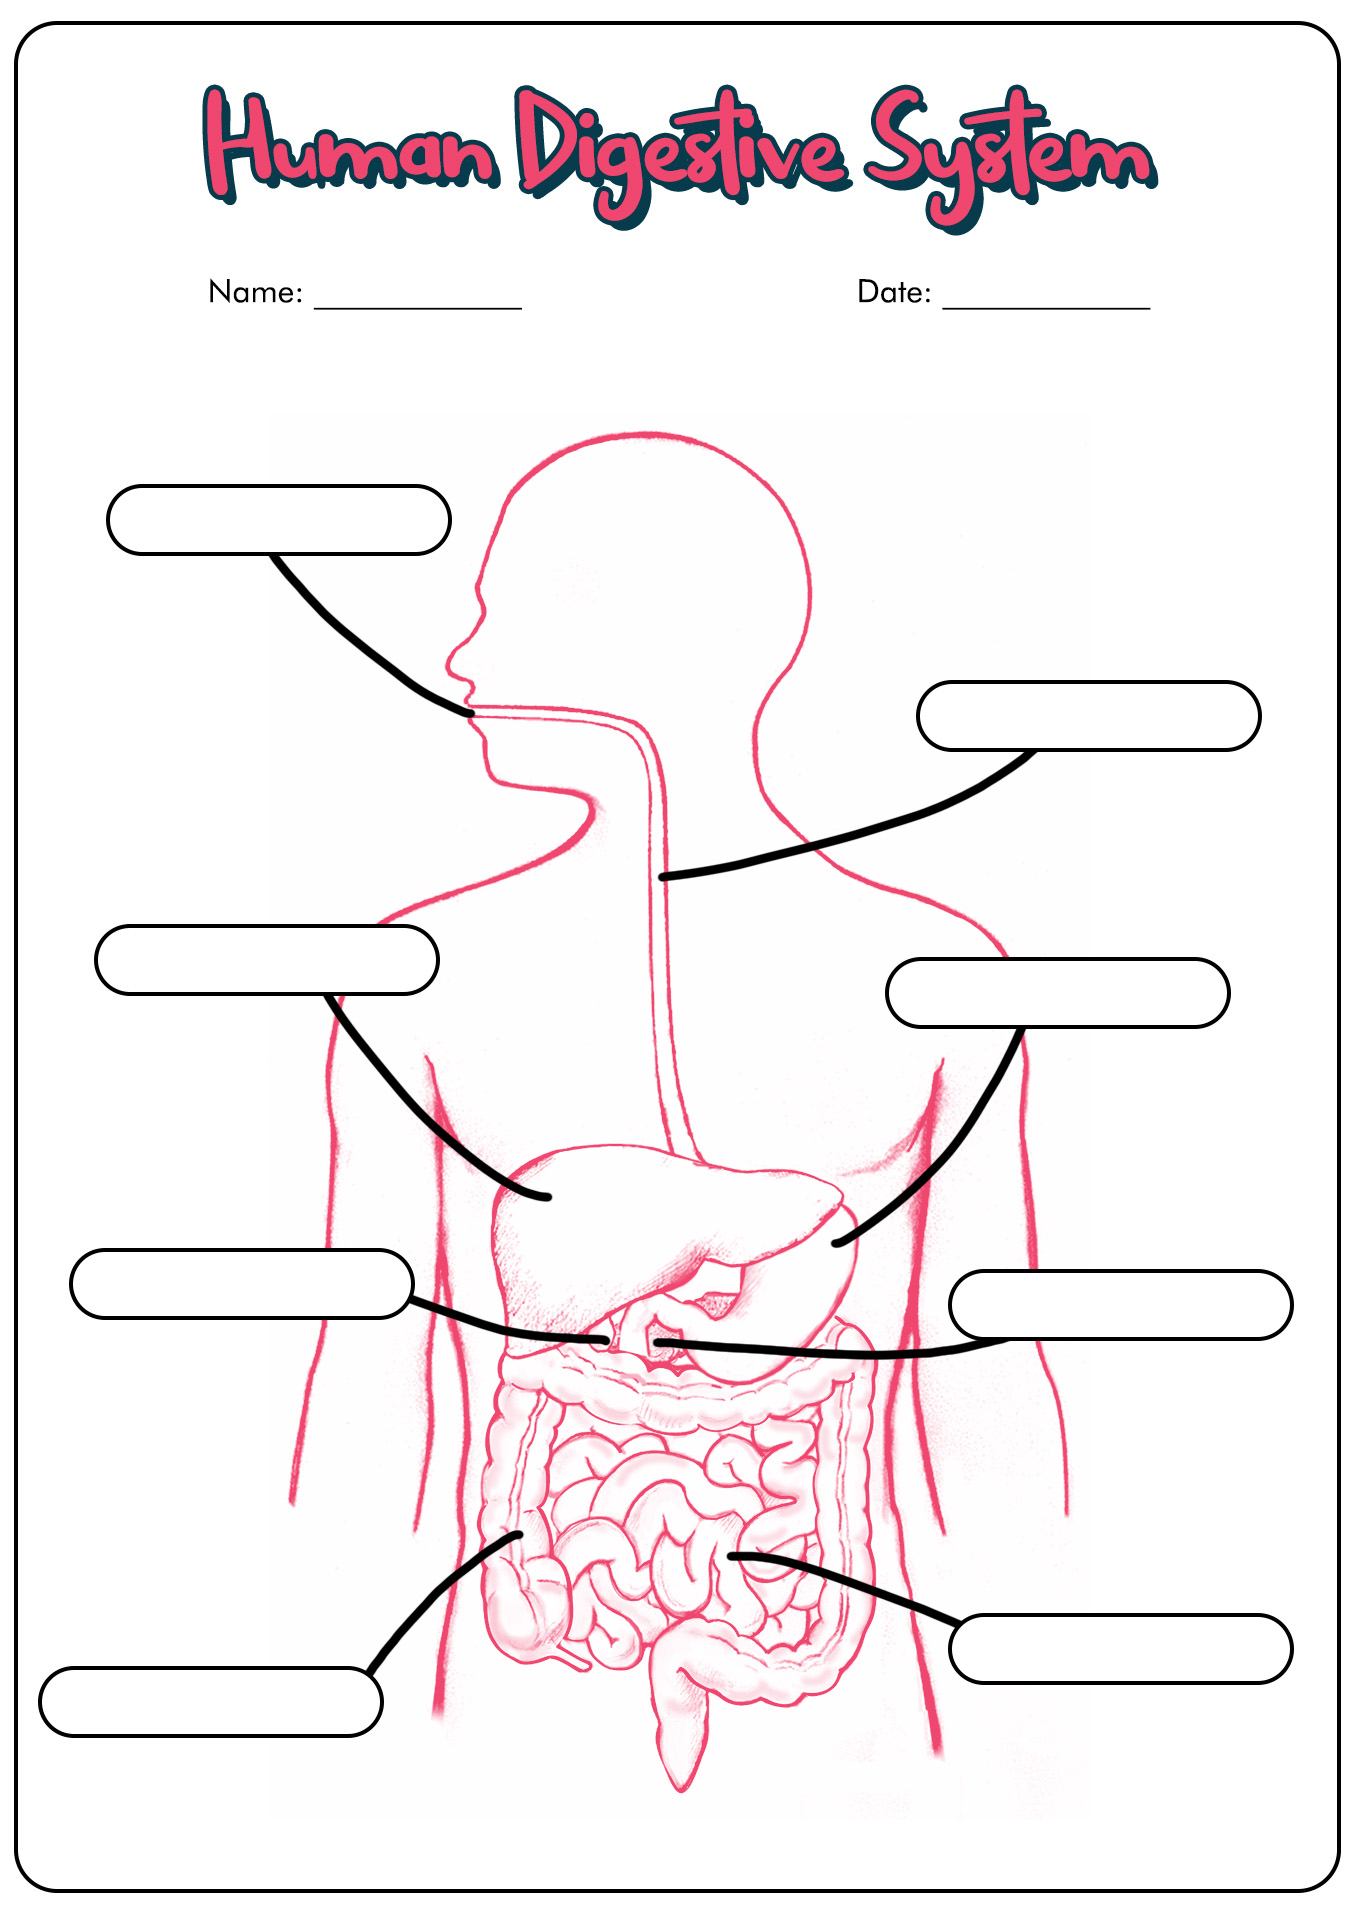 Human Digestive System Worksheet Answers Image